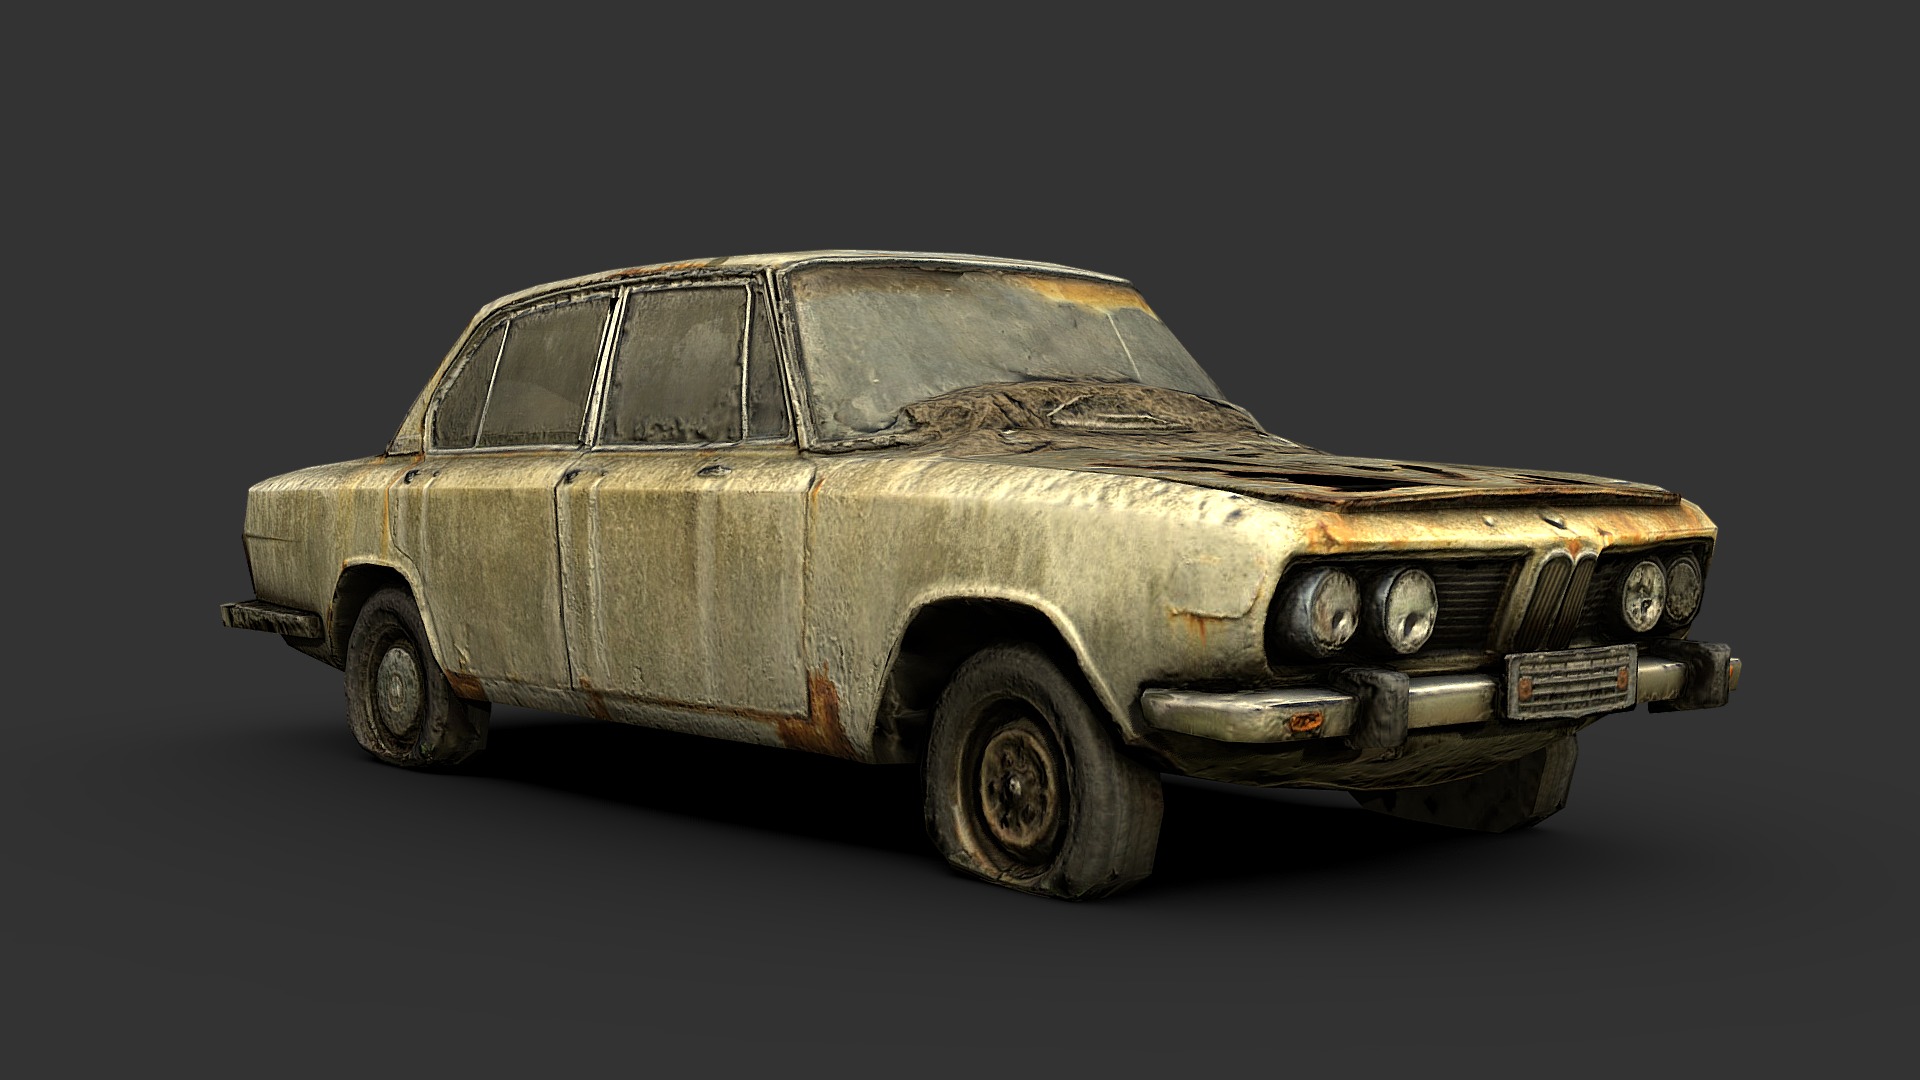 Lowpoly model from 3D scan, photos graciously provided by Sketchfab user https://sketchfab.com/chrisbischoff

Made in 3DSMax and Substance painter - BMW Wreck - 3D model by Renafox (@kryik1023) 3d model